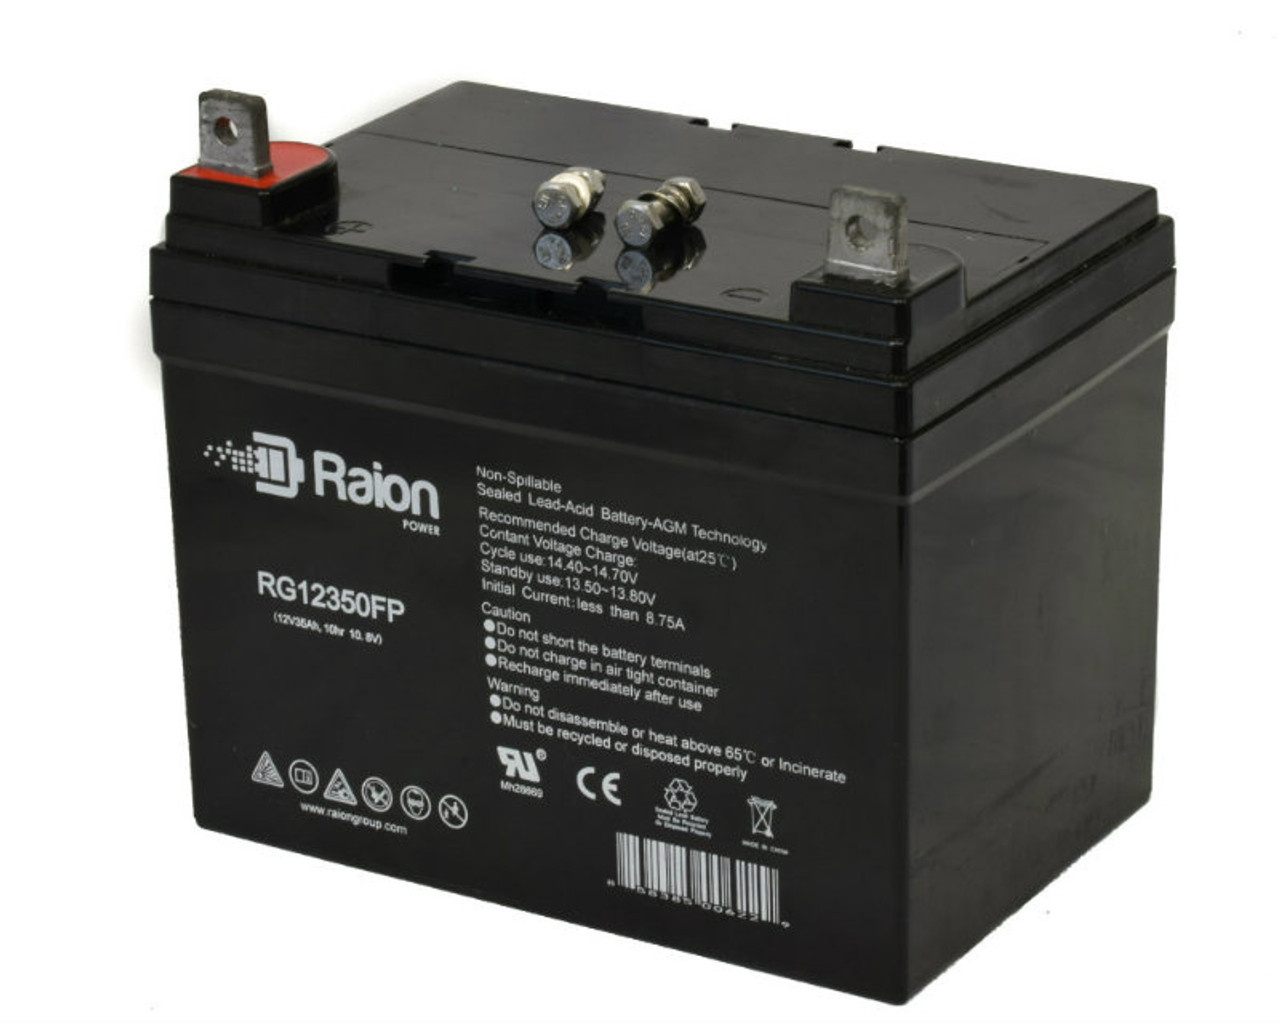 Raion Power 12V 35Ah Replacement UPS Battery Cartridge for Alpha Technologies PS 12300